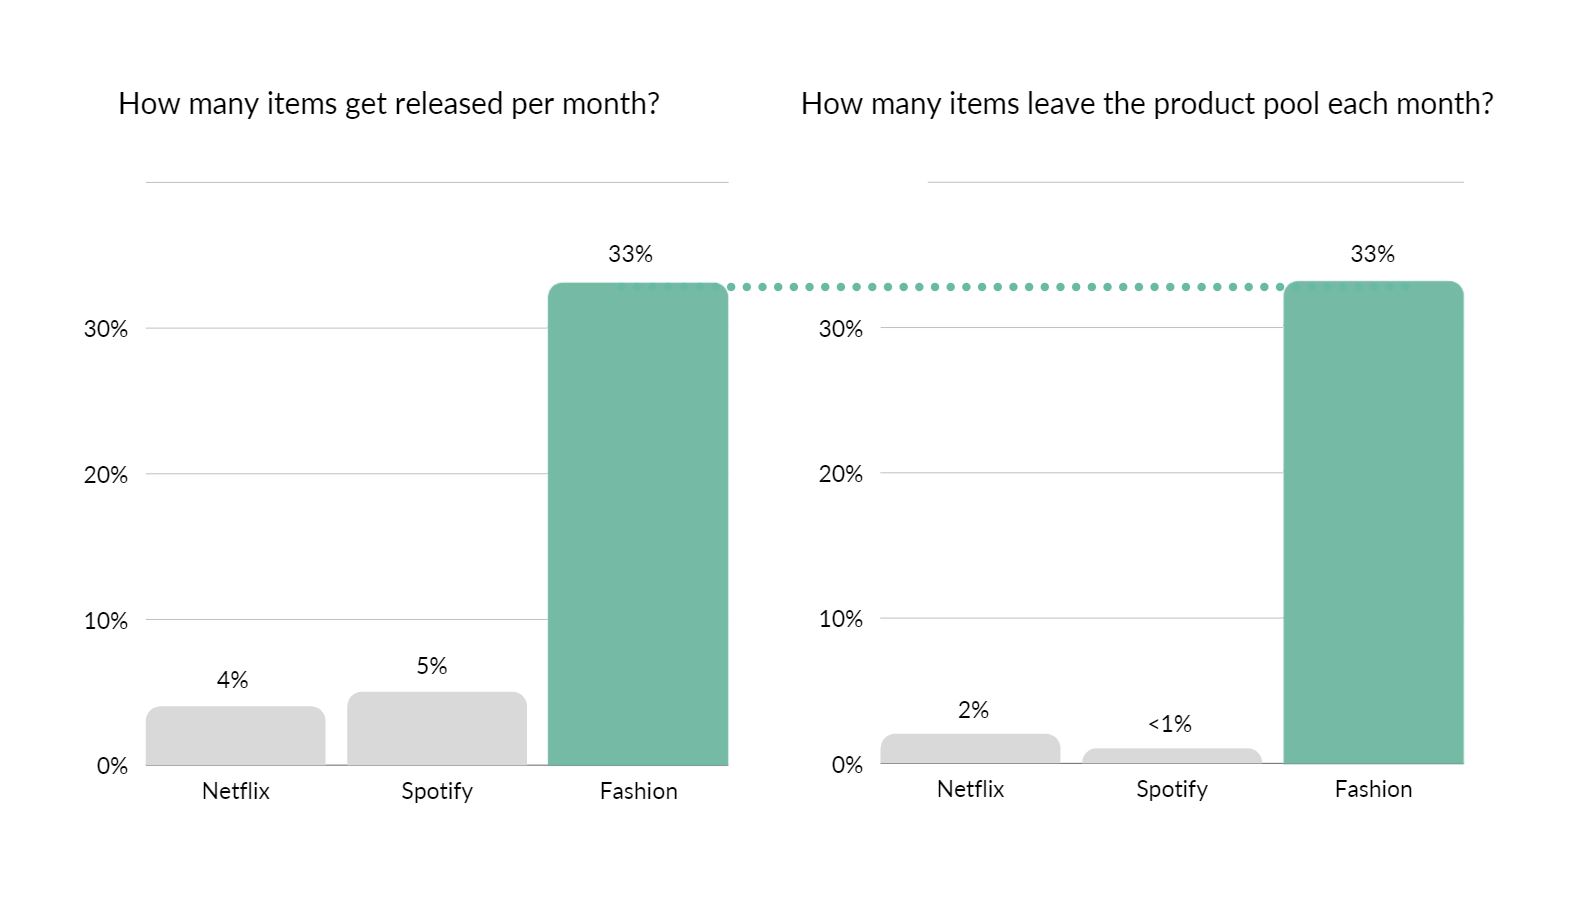 Comparison of how many items are released per month versus how many items leave the product pool per month for Netflix, Spotify, and the fashion domain